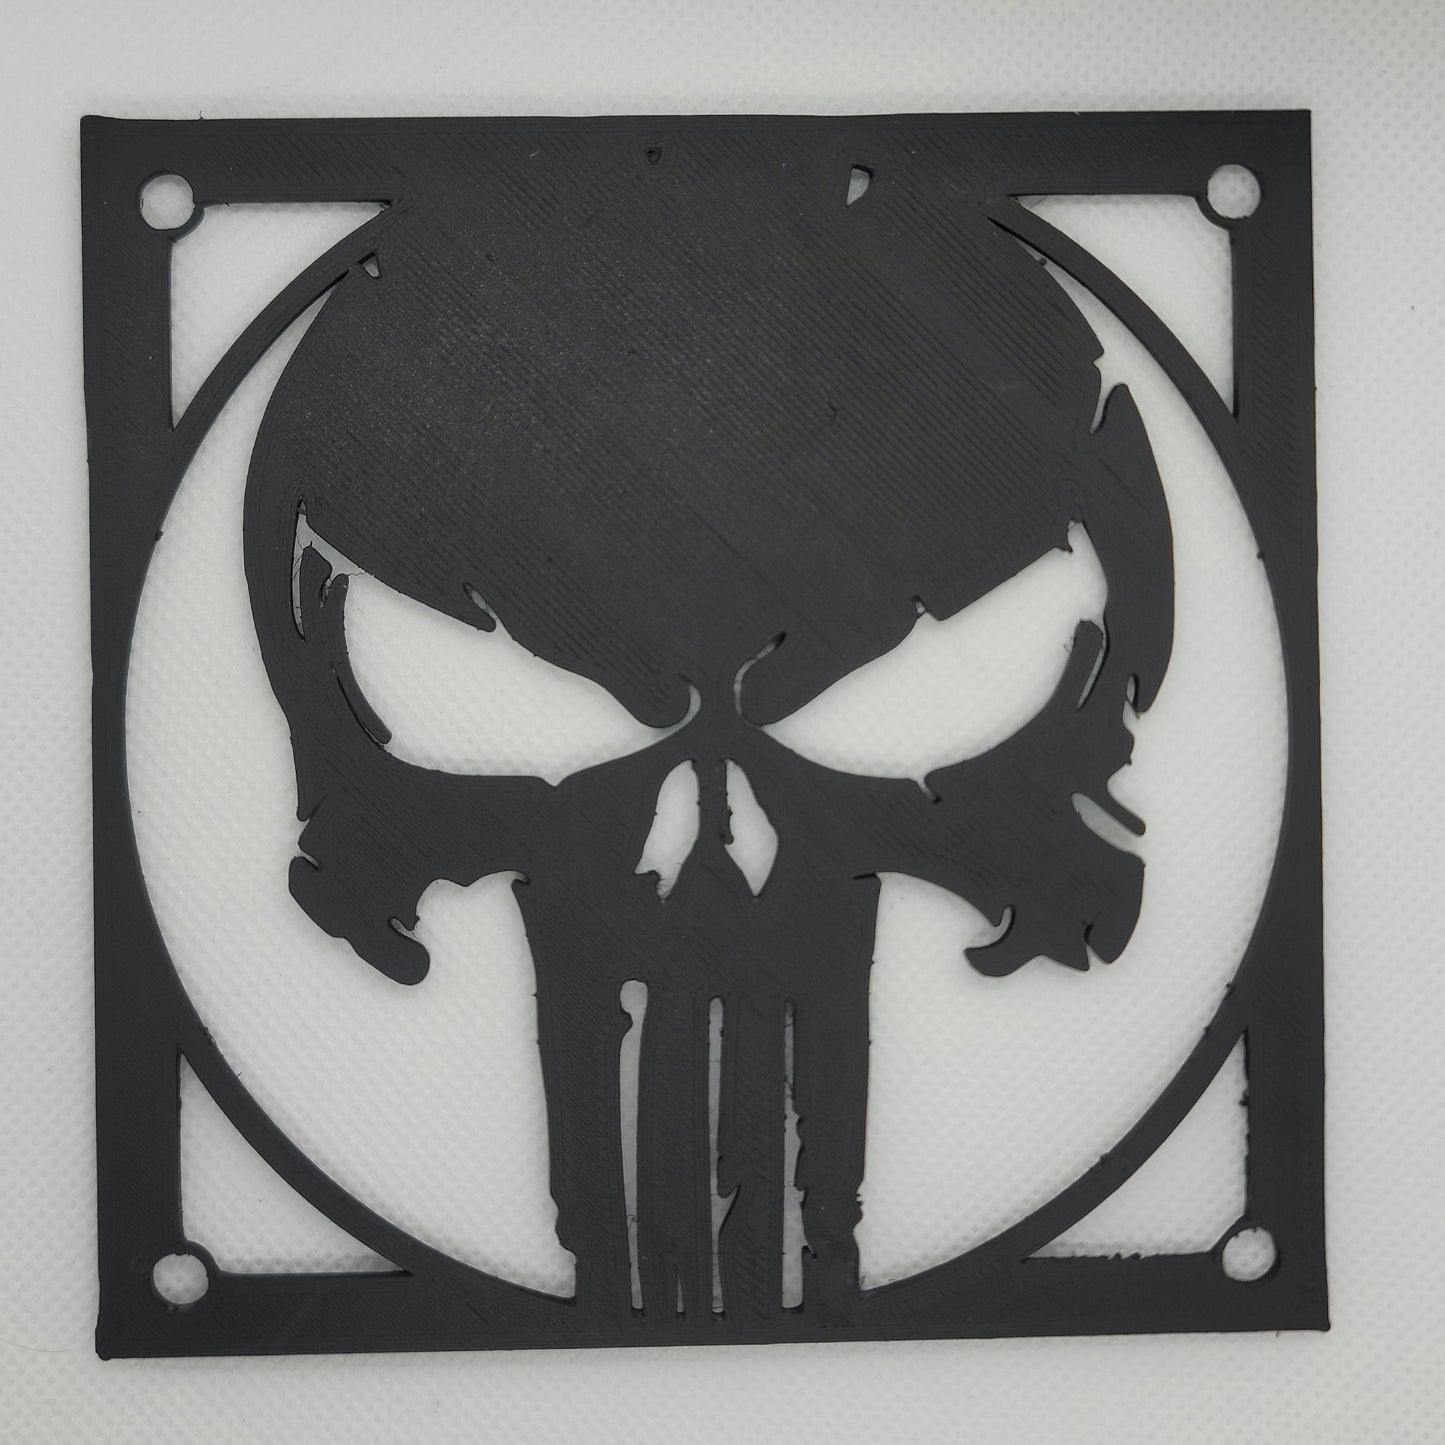 Punisher Fan Cover - Compfans.com